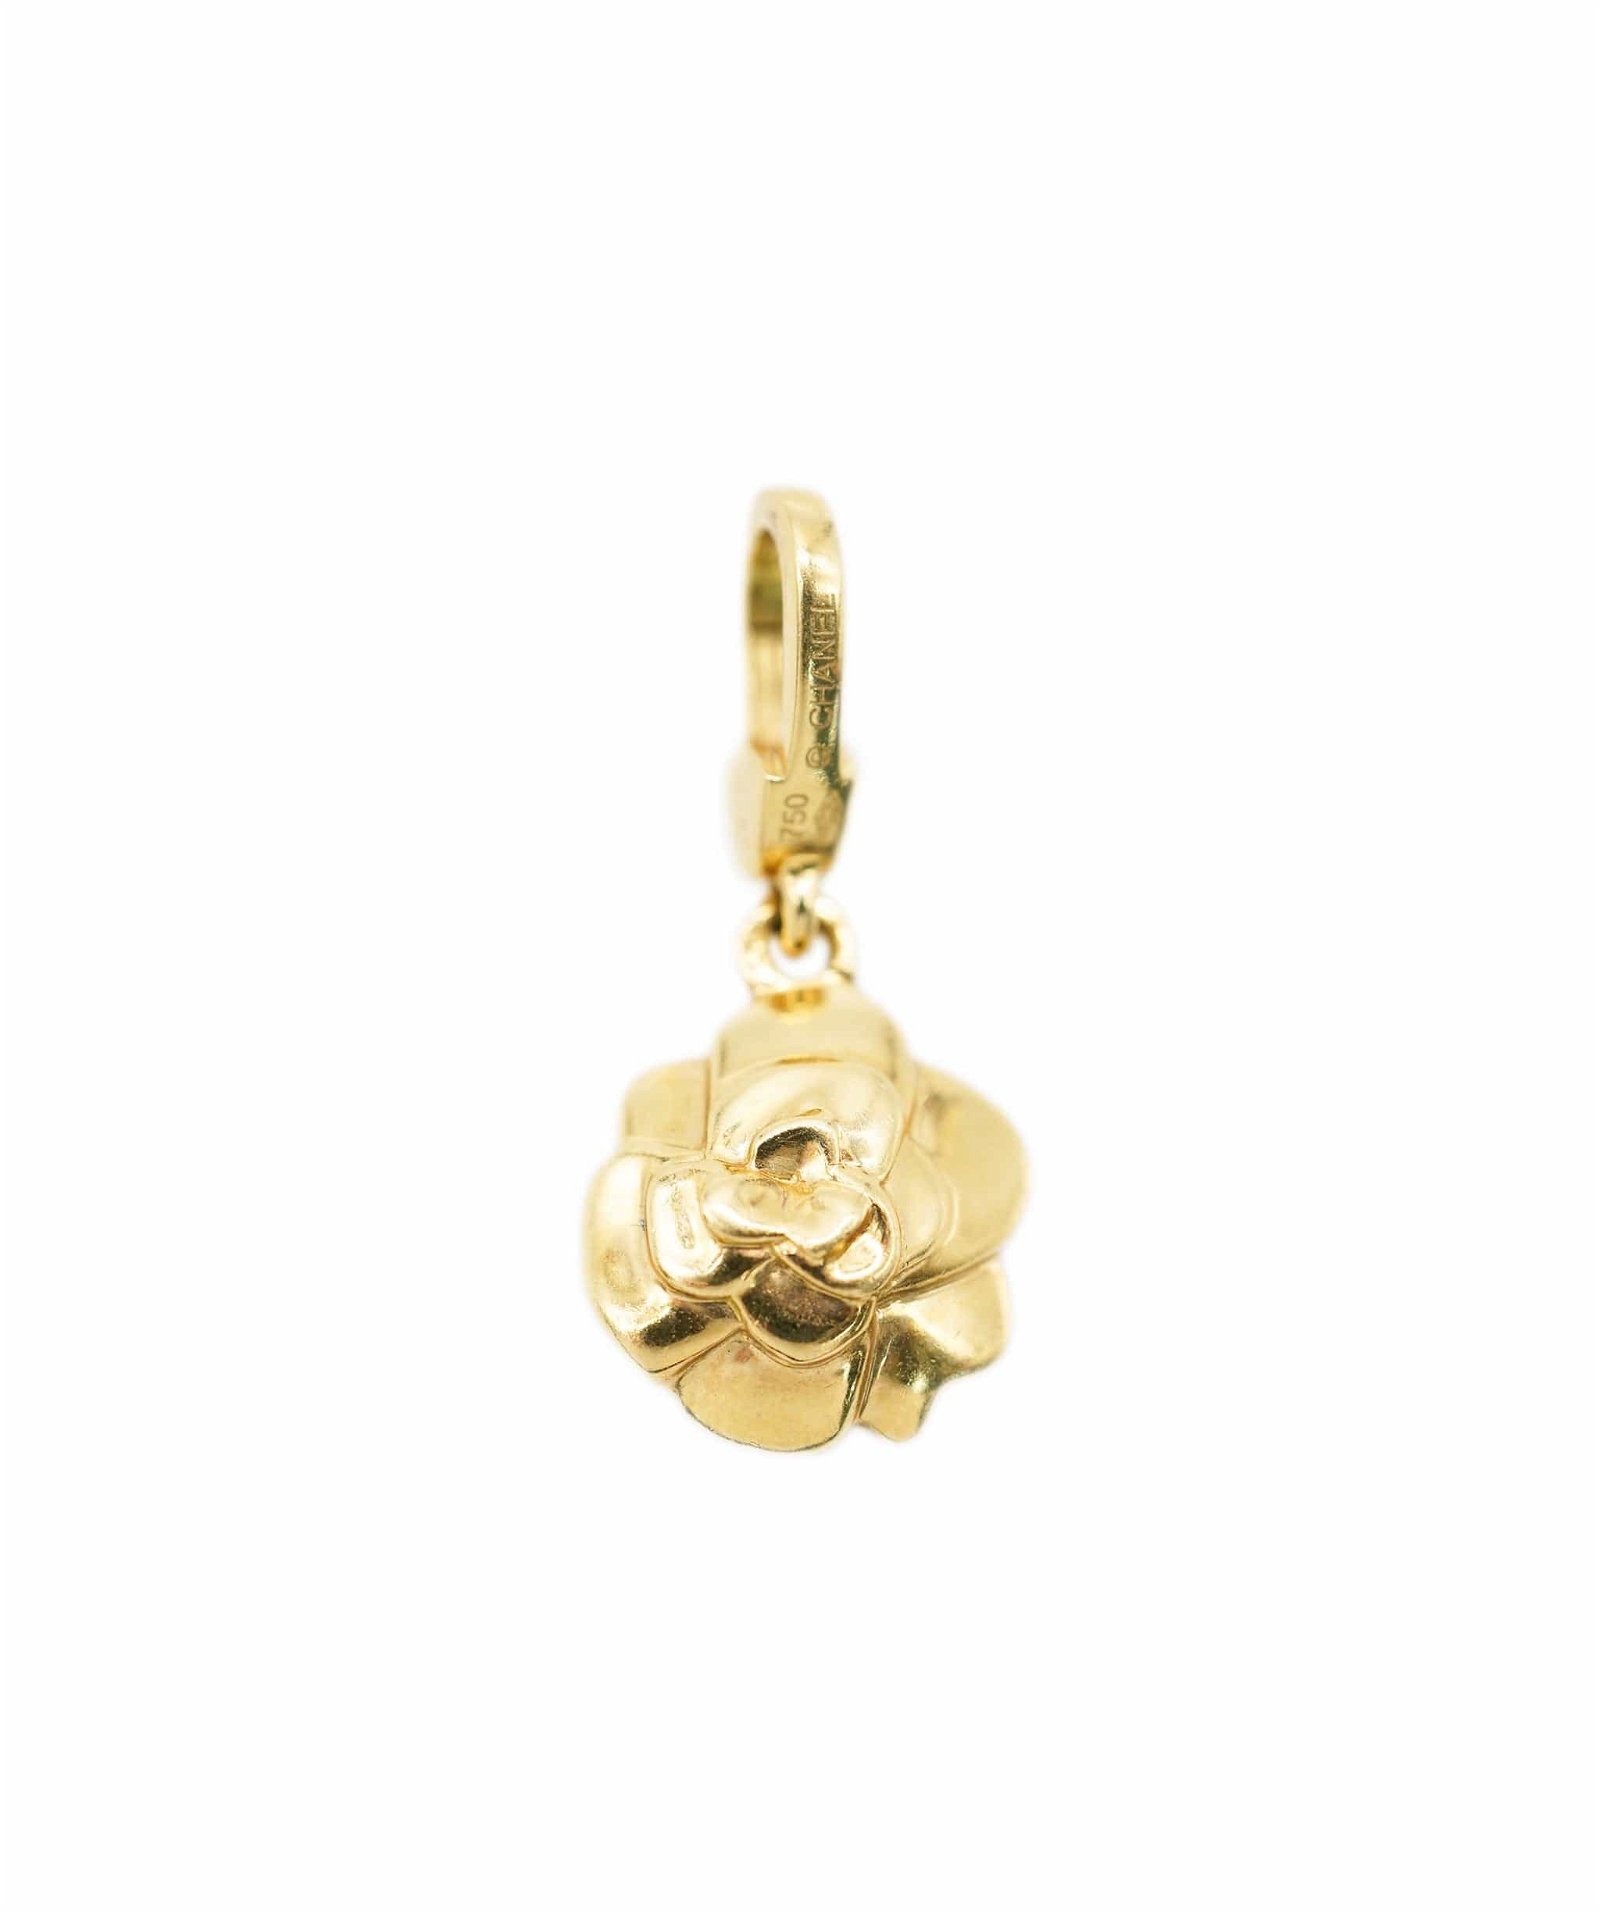 Image of Chanel Fine Jewelley camelia yellow gold pendant / charm AHC1917